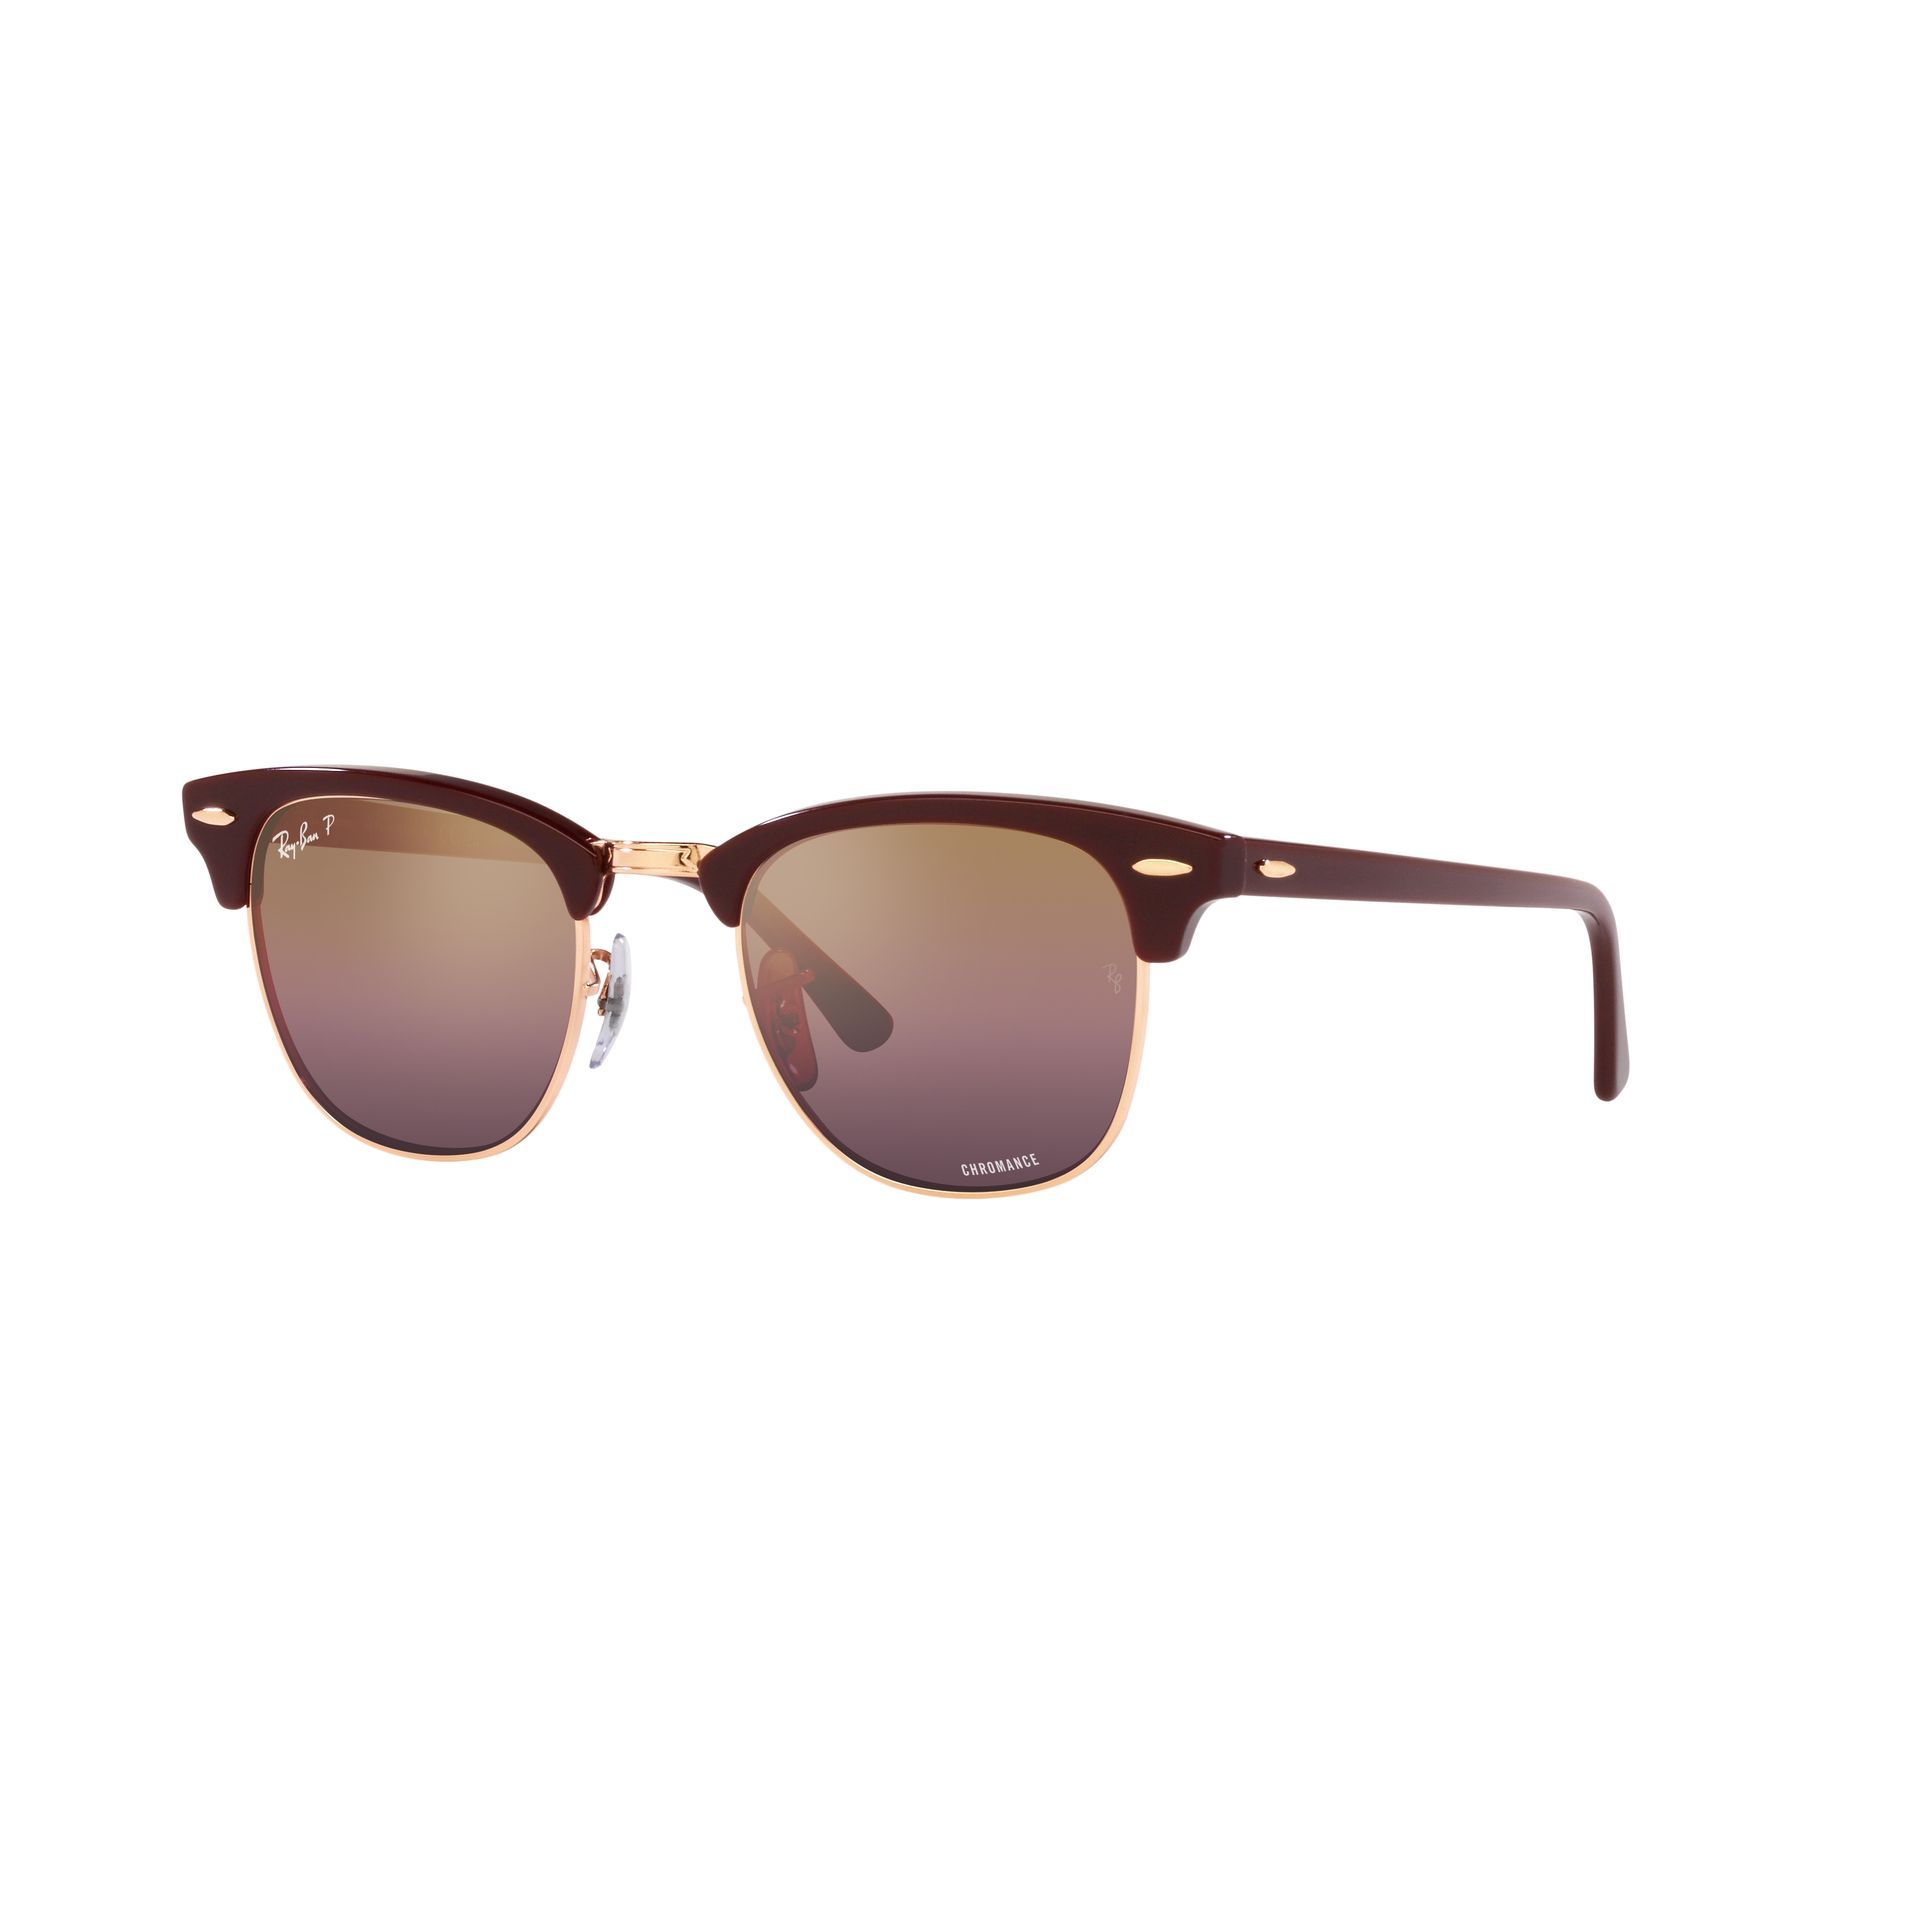 0RB3016 Clubmaster Sunglasses 1365G9 - size 51